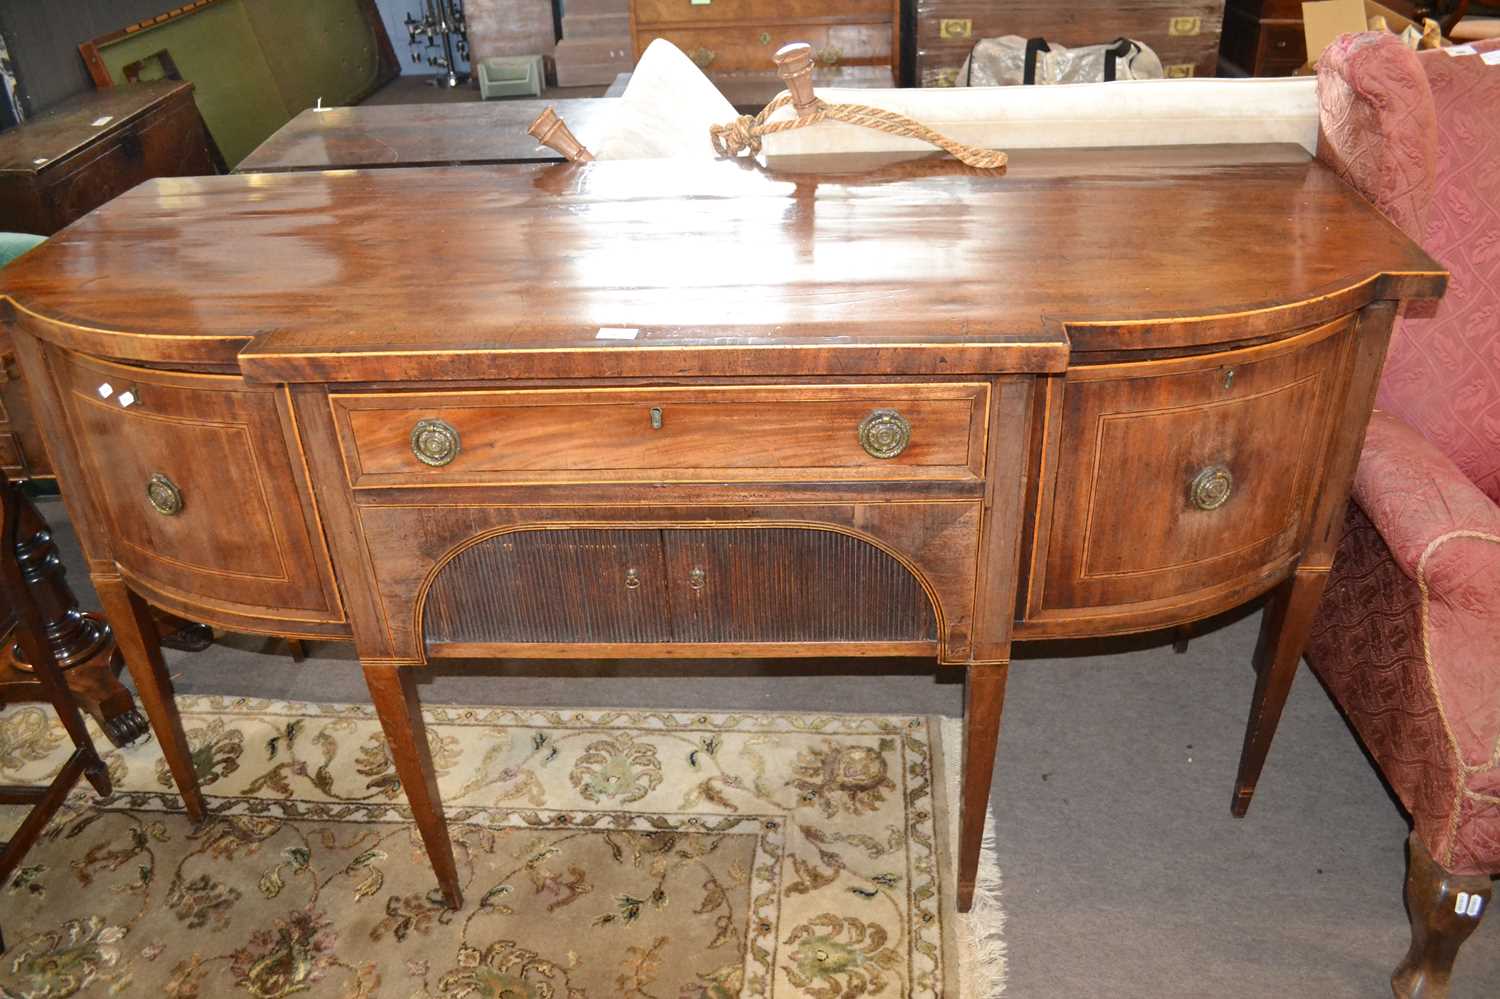 Georgian mahogany break front sideboard with two deep drawers, a shallow centre drawer and a